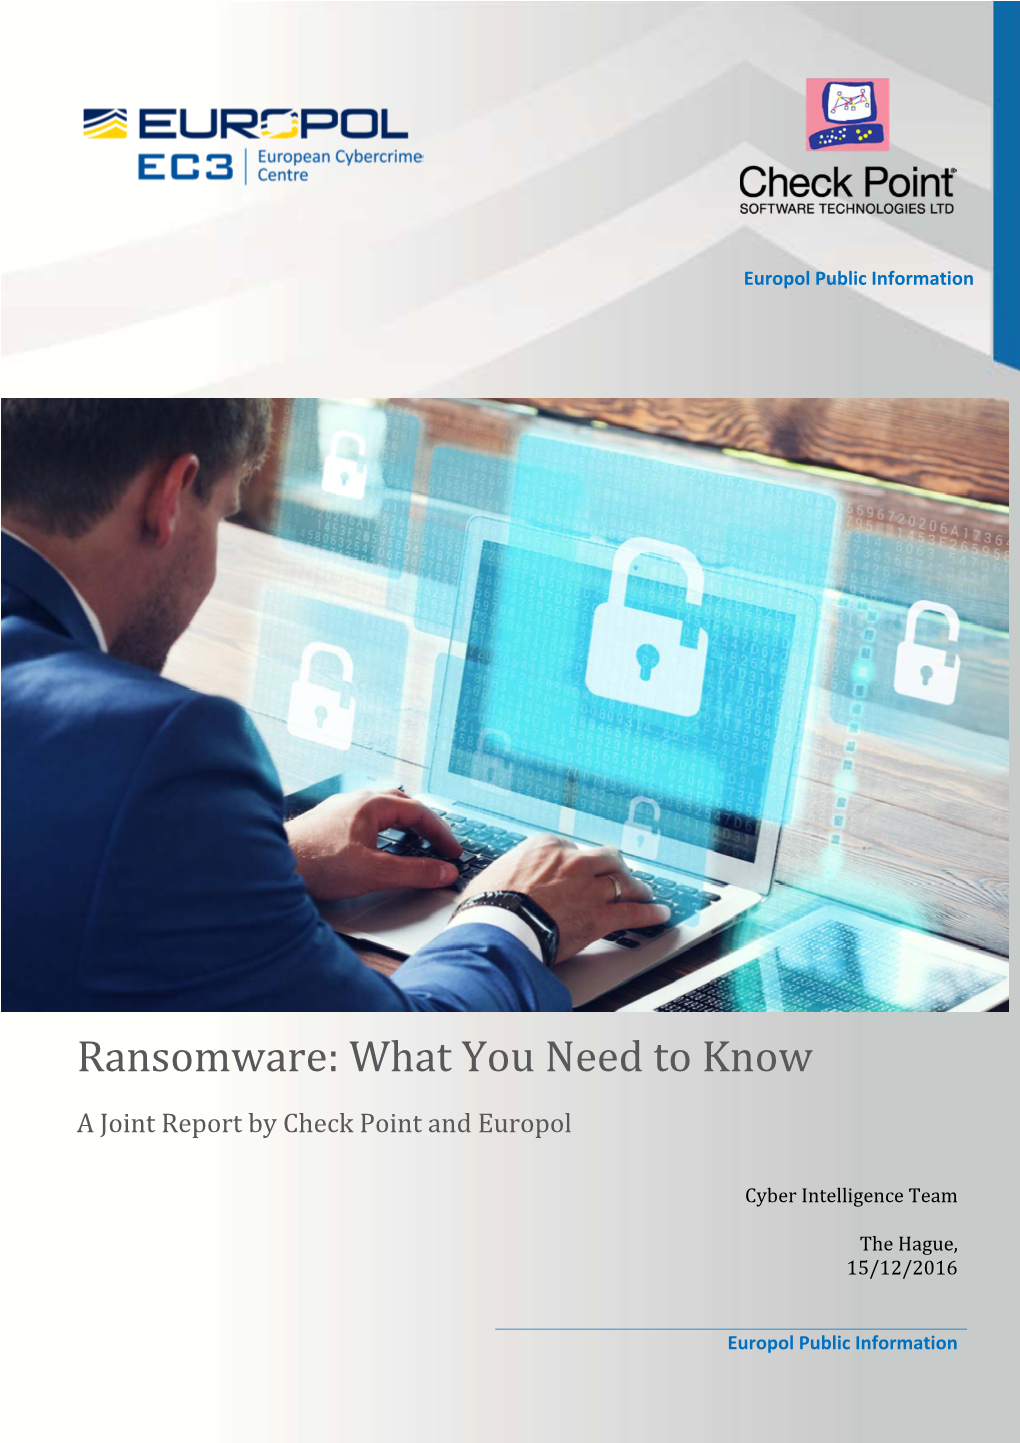 Ransomware: What You Need to Know a Joint Report by Check Point and Europol